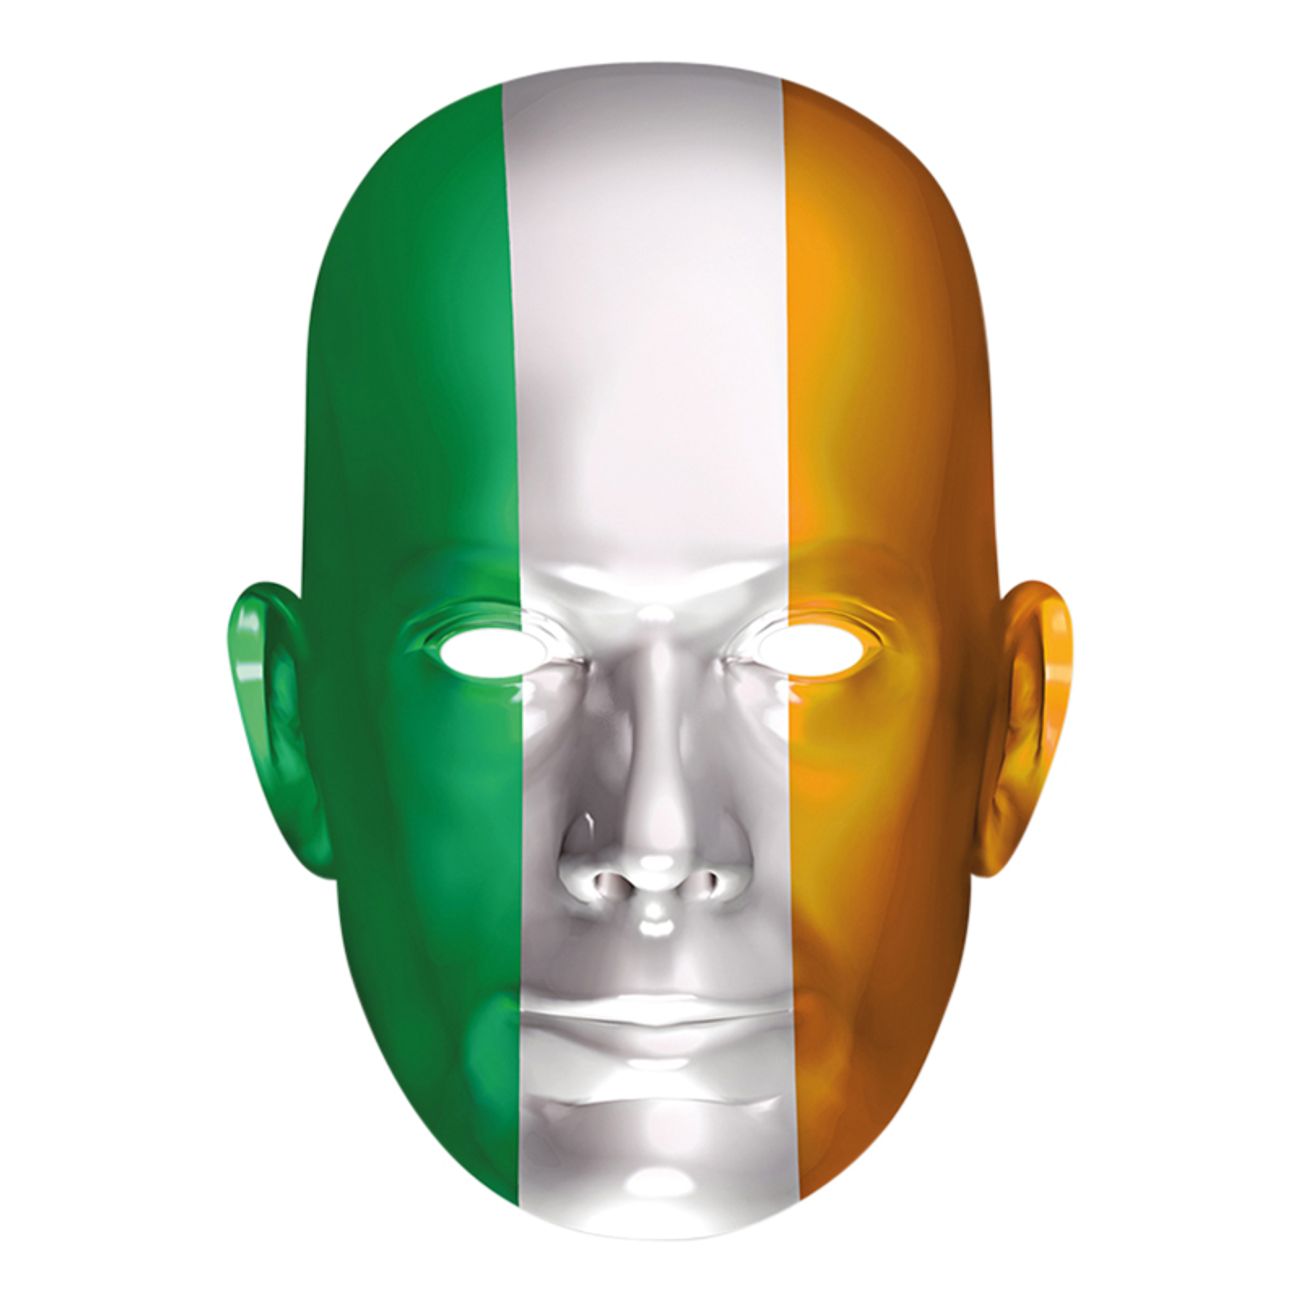 irlands-flagga-pappmask-2